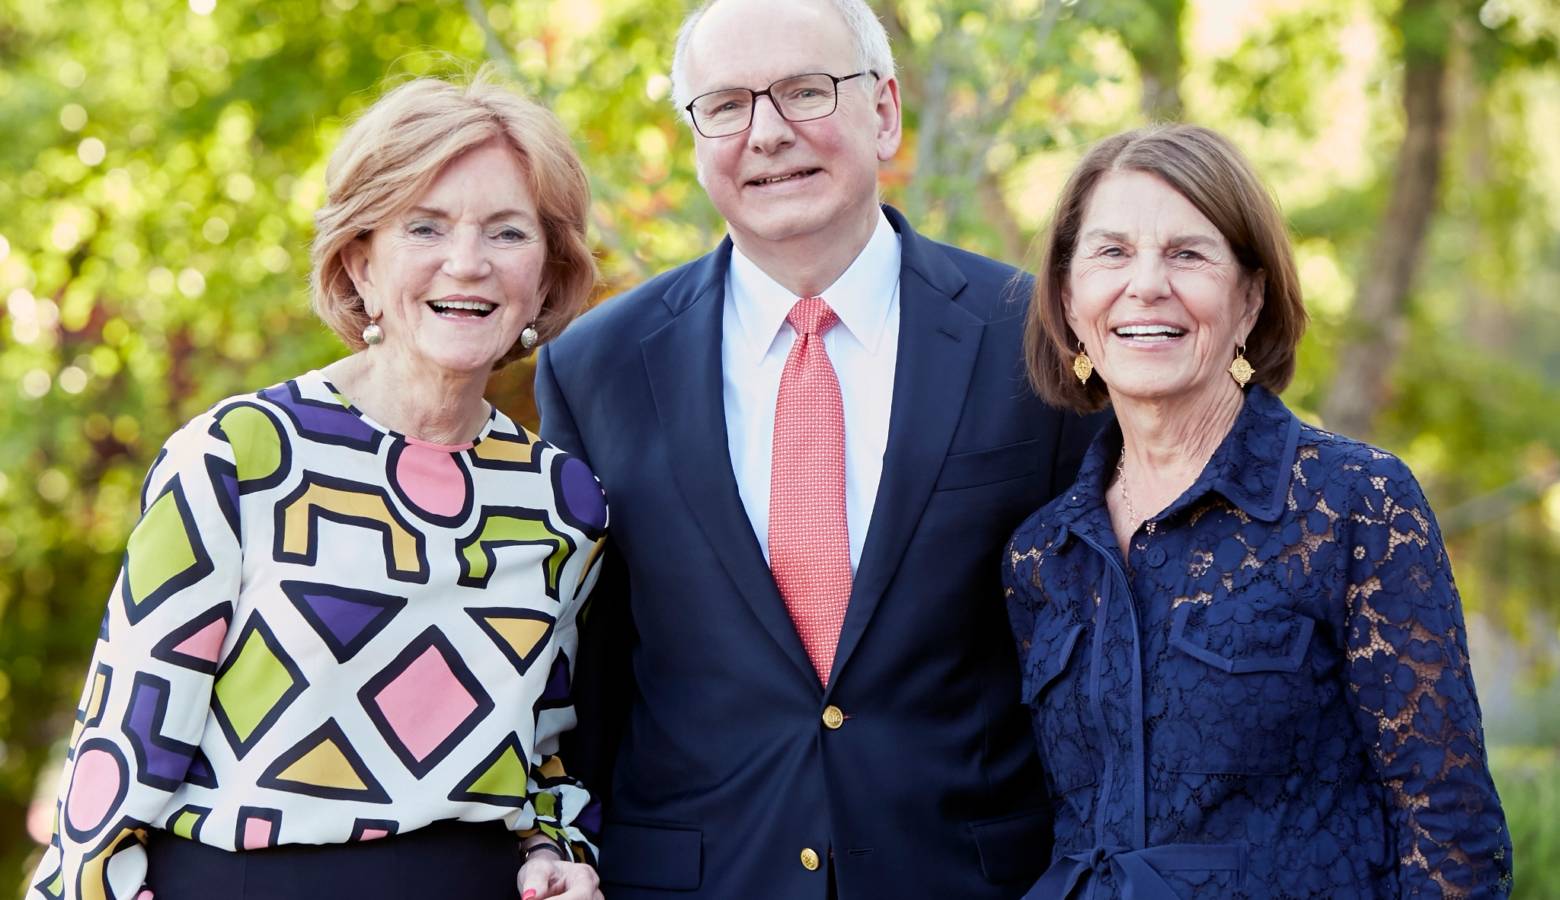 IU School of Medicine Dean Jay Hess (center) with Vera Bradley co-founders Barbara Bradley Baekgaard (left) and Patricia R. Miller (right). The Foundation has contributed more than $35 million for breast cancer research. (Courtesy of Indiana University Sc